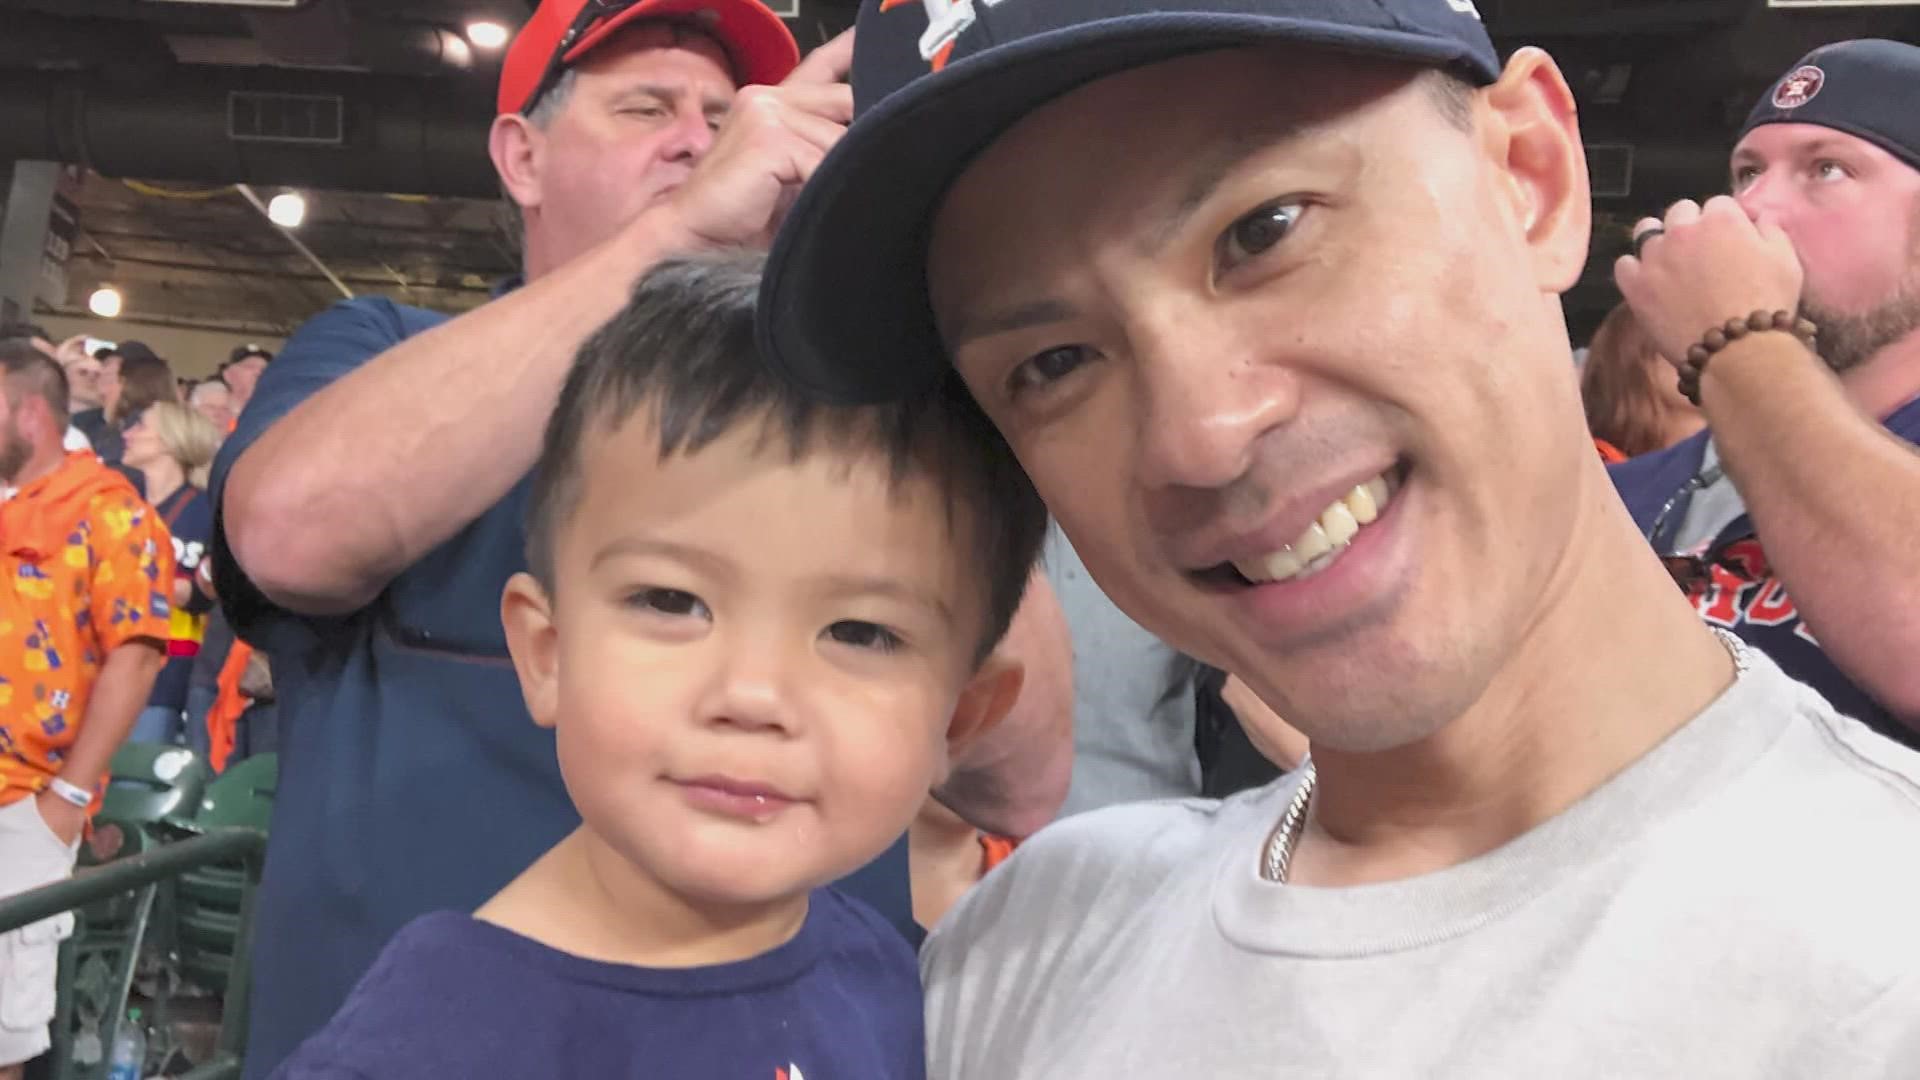 Kevin Gee has been to every World Series game with the Astros since 2017. He usually goes with his father and son, but he's going by himself this year.